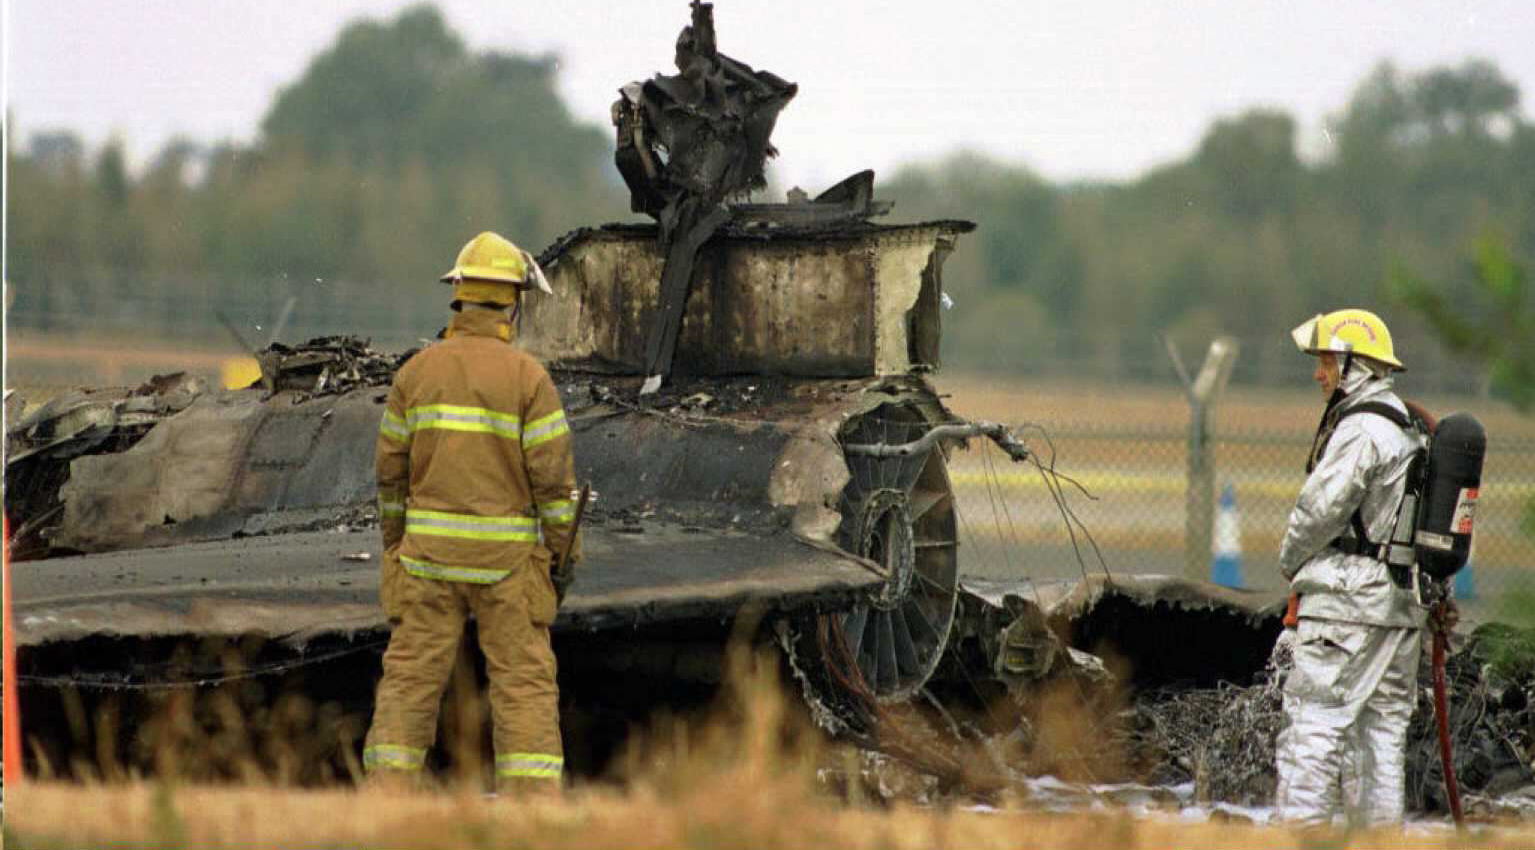 US Air Force firecrews survey the wreckage of the U2 reconnaissance plane, which crashed during take-off 29 August from the former US Air Force base at Fairford, 70 miles west of London. (STR/AFP via Getty Images)